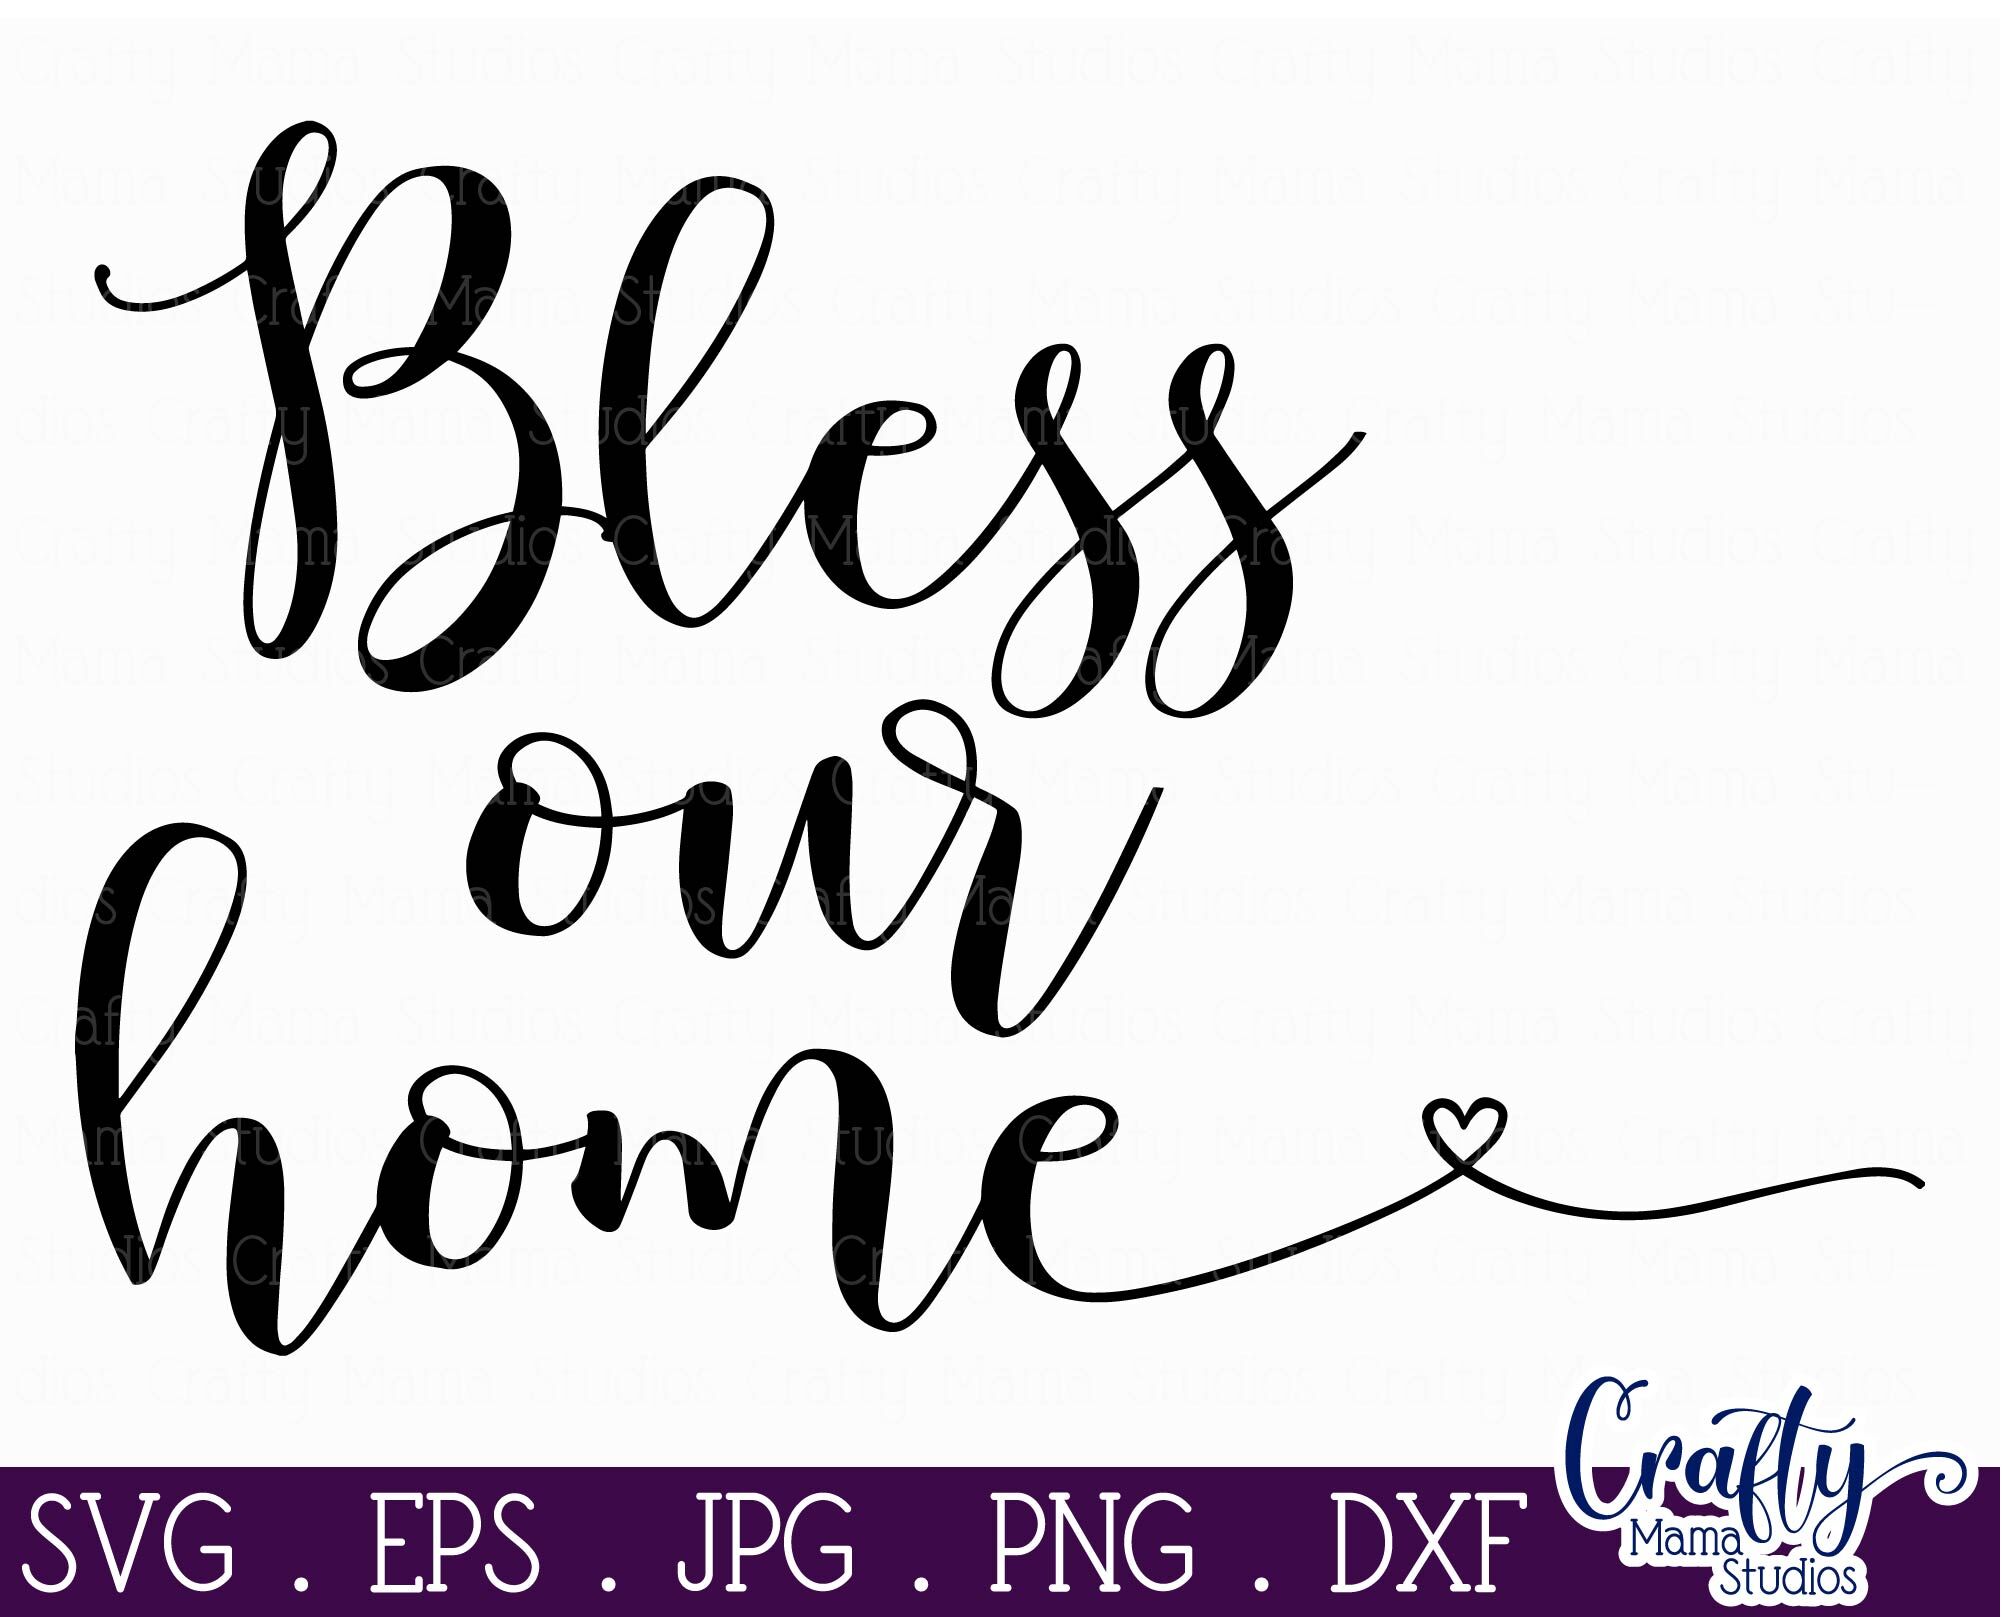 Download Bless Our Home Home Sweet Home Svg Welcome Svg By Crafty Mama Studios Thehungryjpeg Com